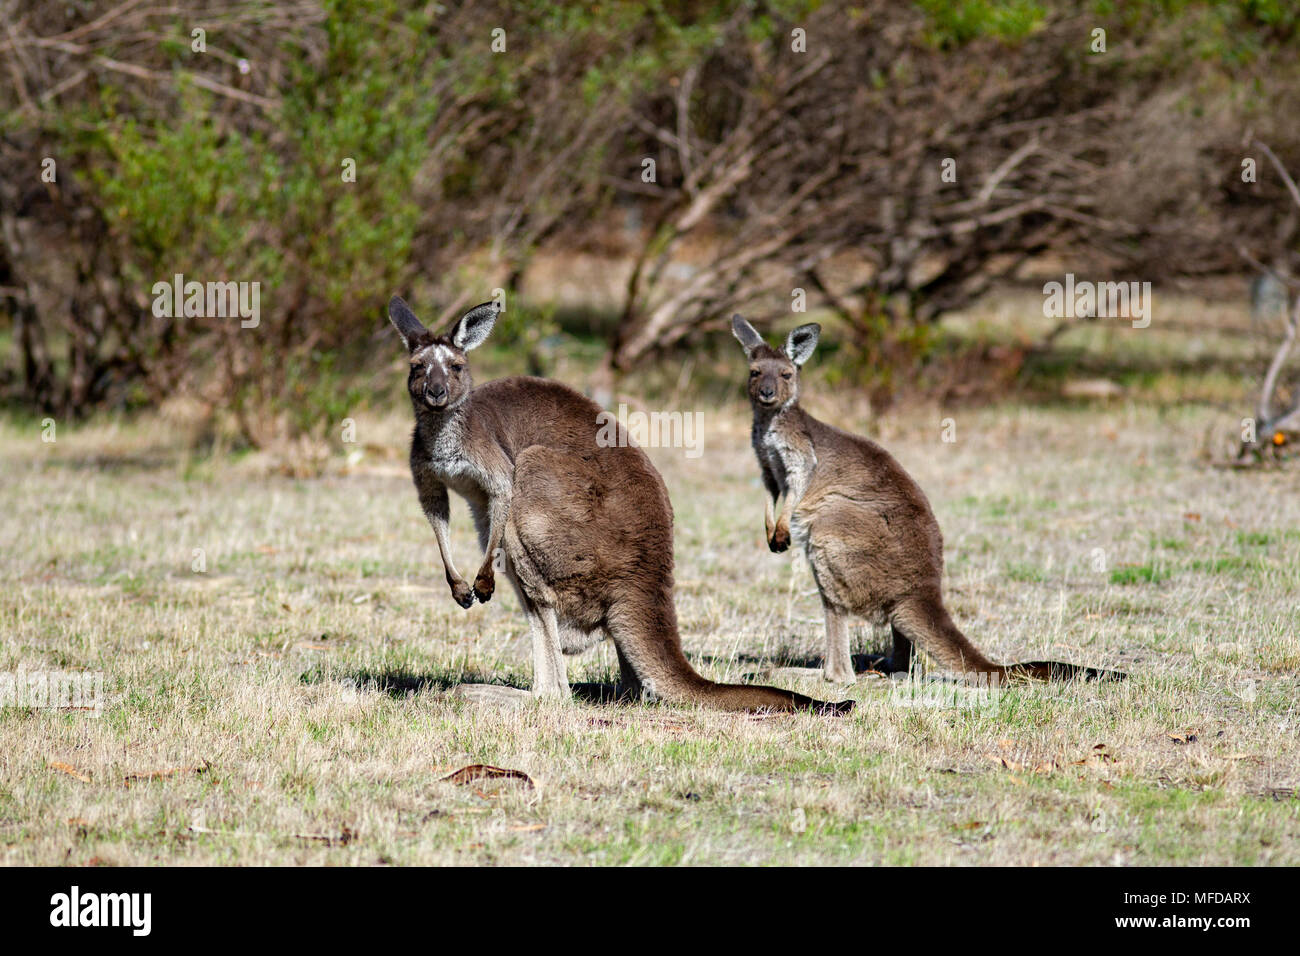 2 Two kangaroo wallabies at the Mount Bold Reservoir on 25th April 2018 Stock Photo